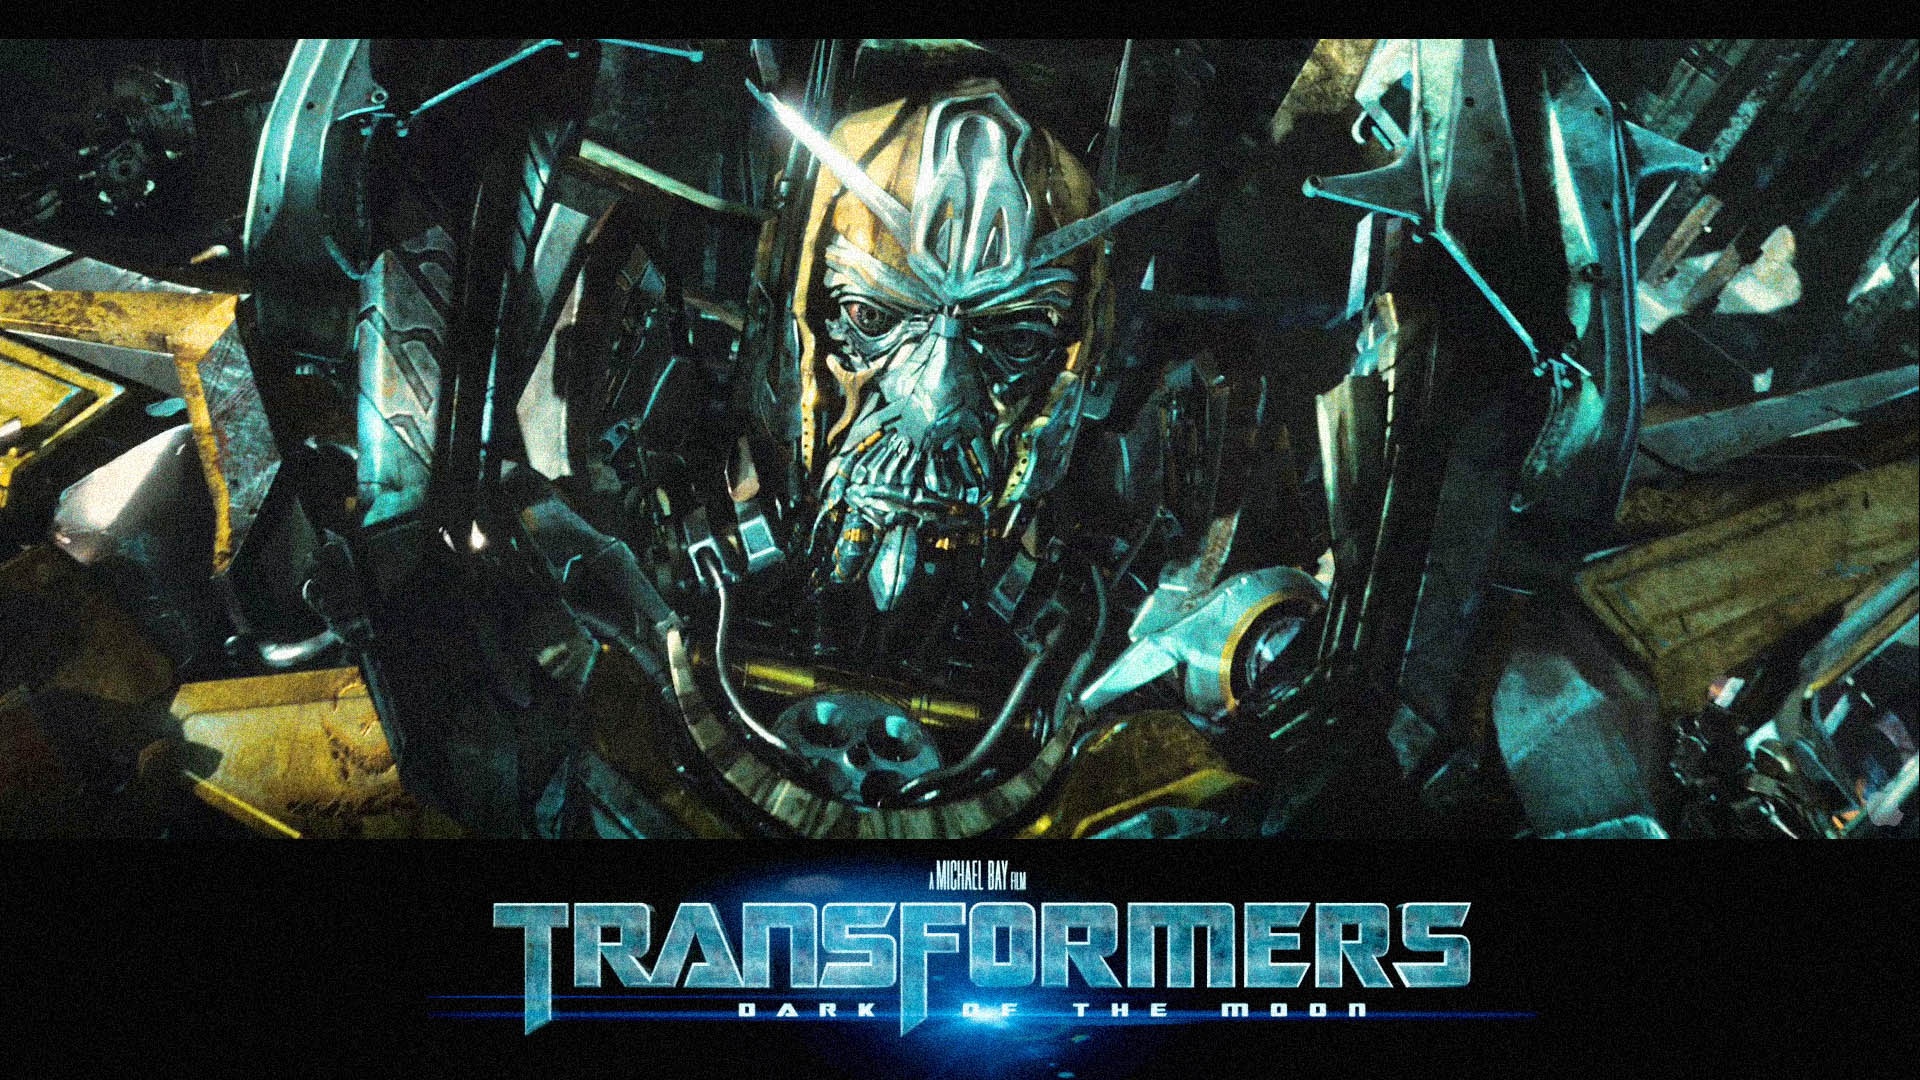 Wallpapers Hd Transformers 3 Hd Sentinel Prime - Father Of Optimus Prime - HD Wallpaper 